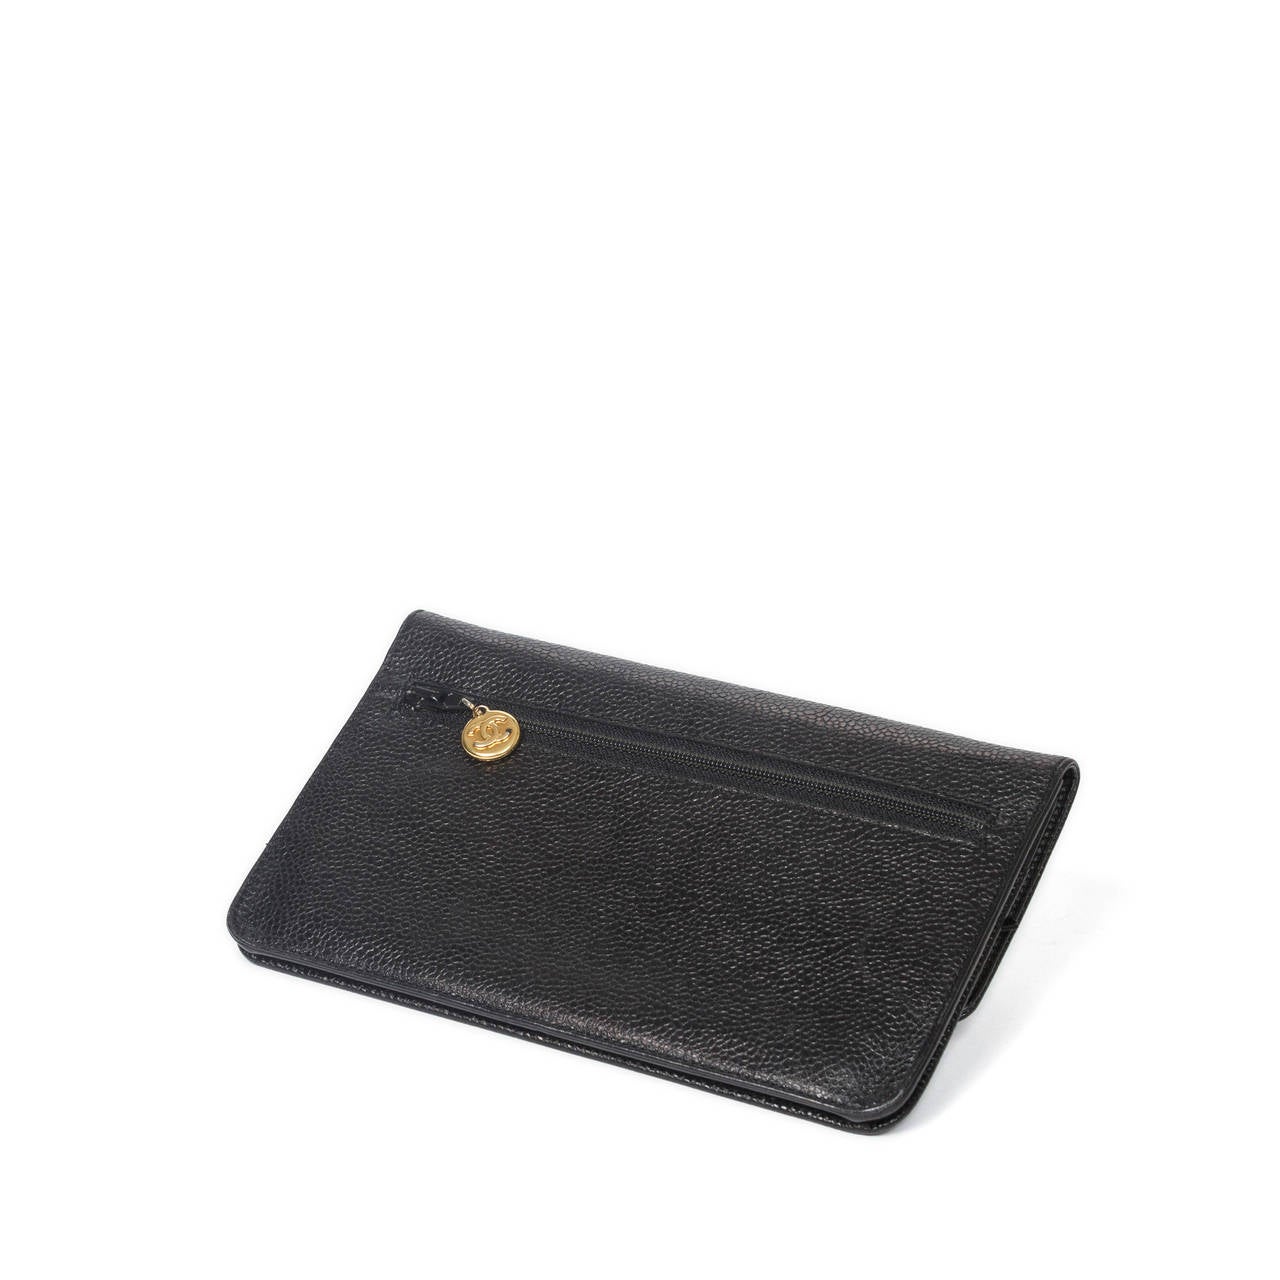 Chanel Pouch wallet in black grained leather. Gold tone hardware. Authenticity card included. Date code : 3454723. Model of 1994 -1996. Slight scuffs on the leather. Excellent condition.